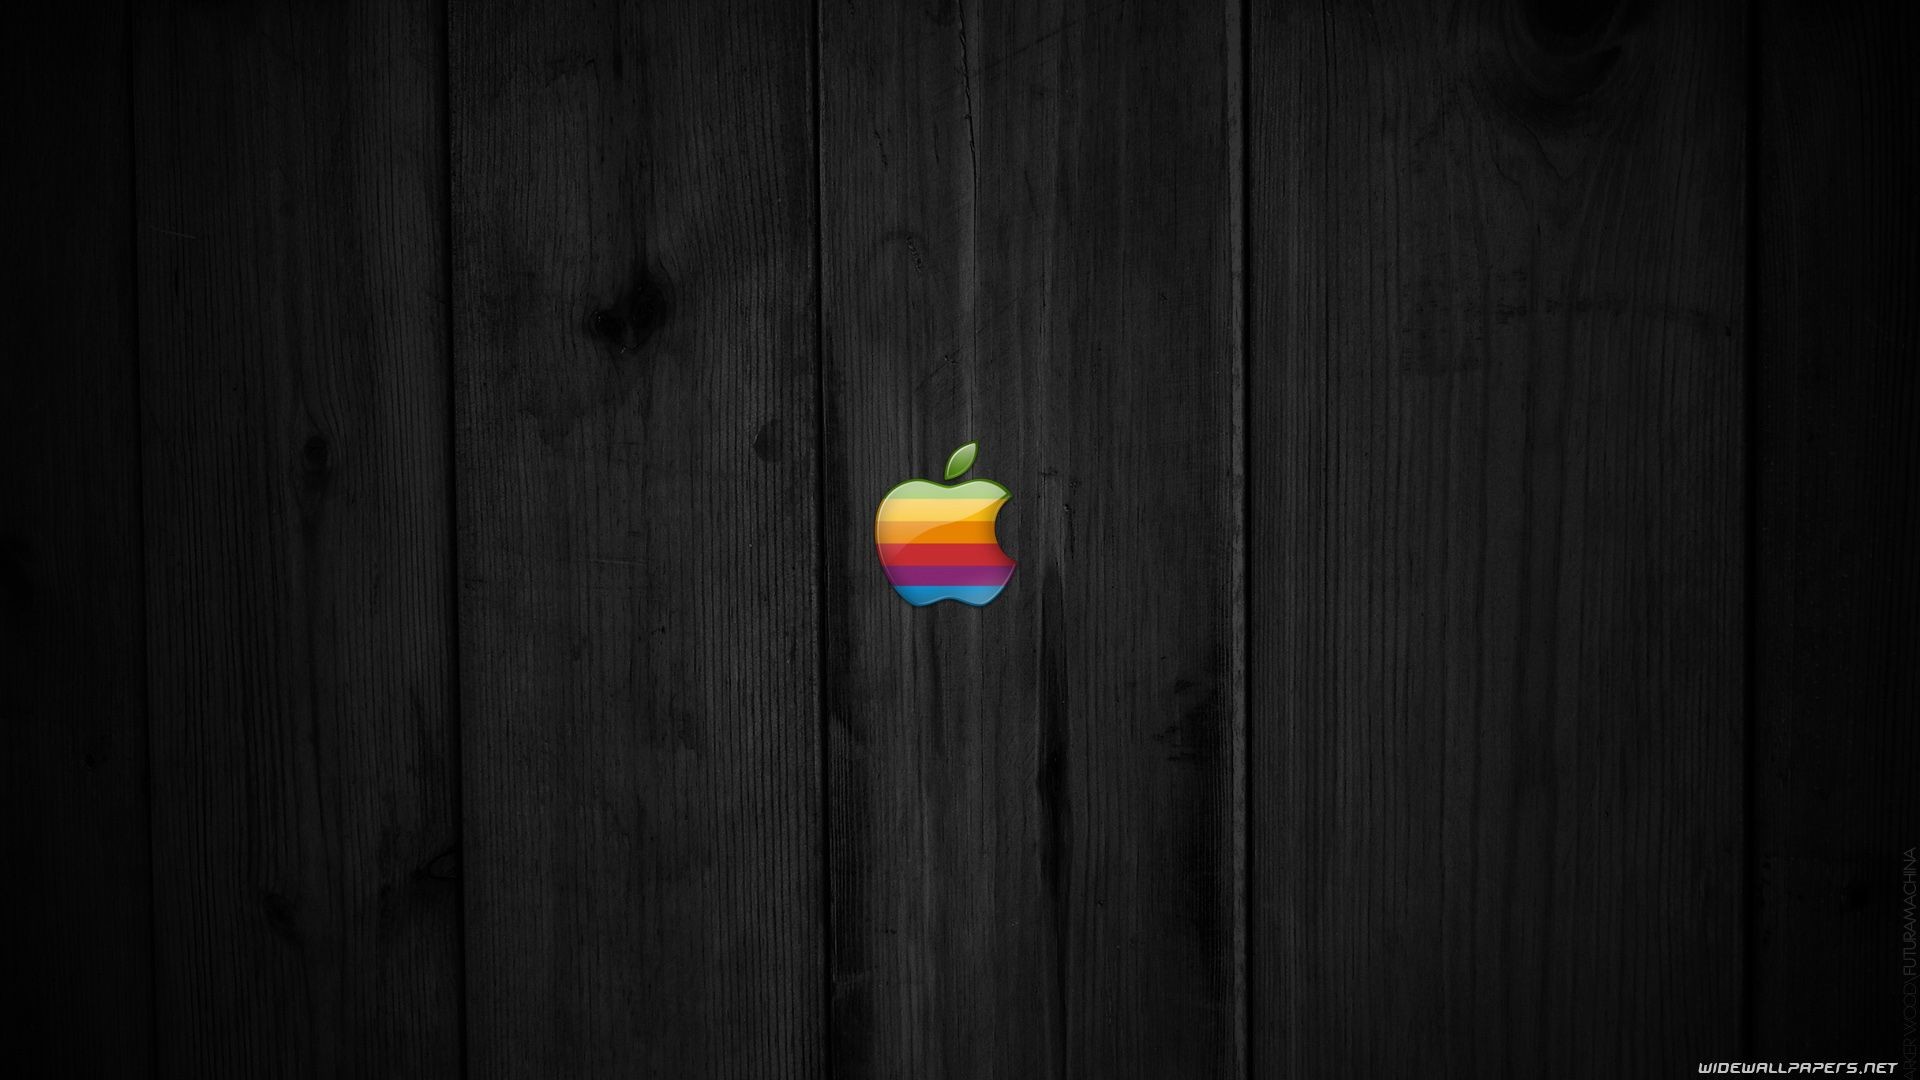 1920x1080 Apple Wood Wallpapers (35 Wallpapers)